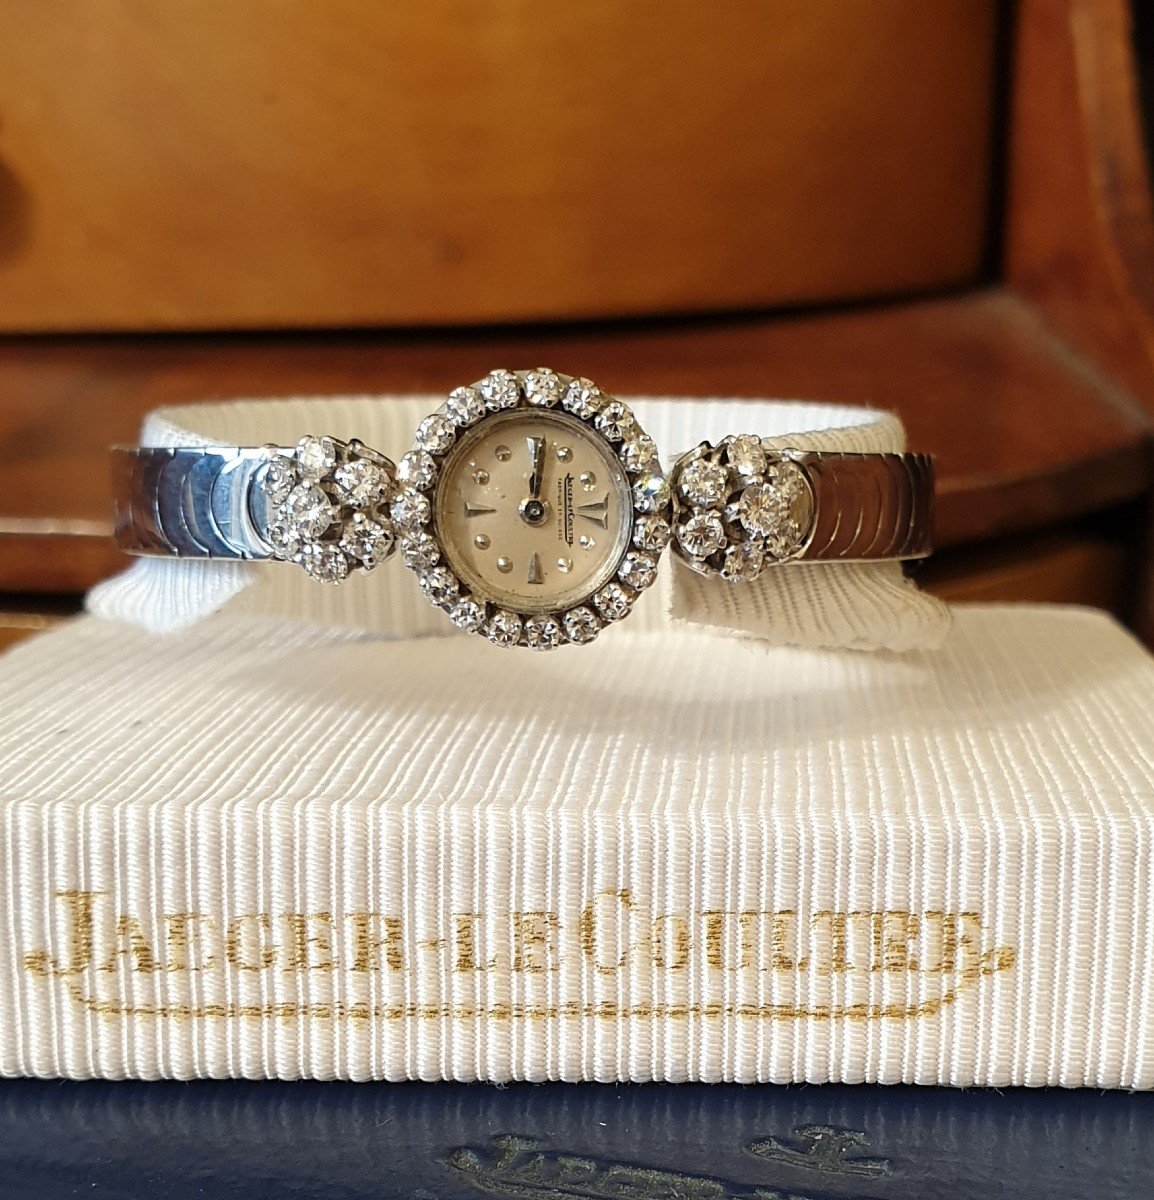 Women's Jewelry Bracelet Watch (white Gold And Diamonds) Jaeger Lecoultre